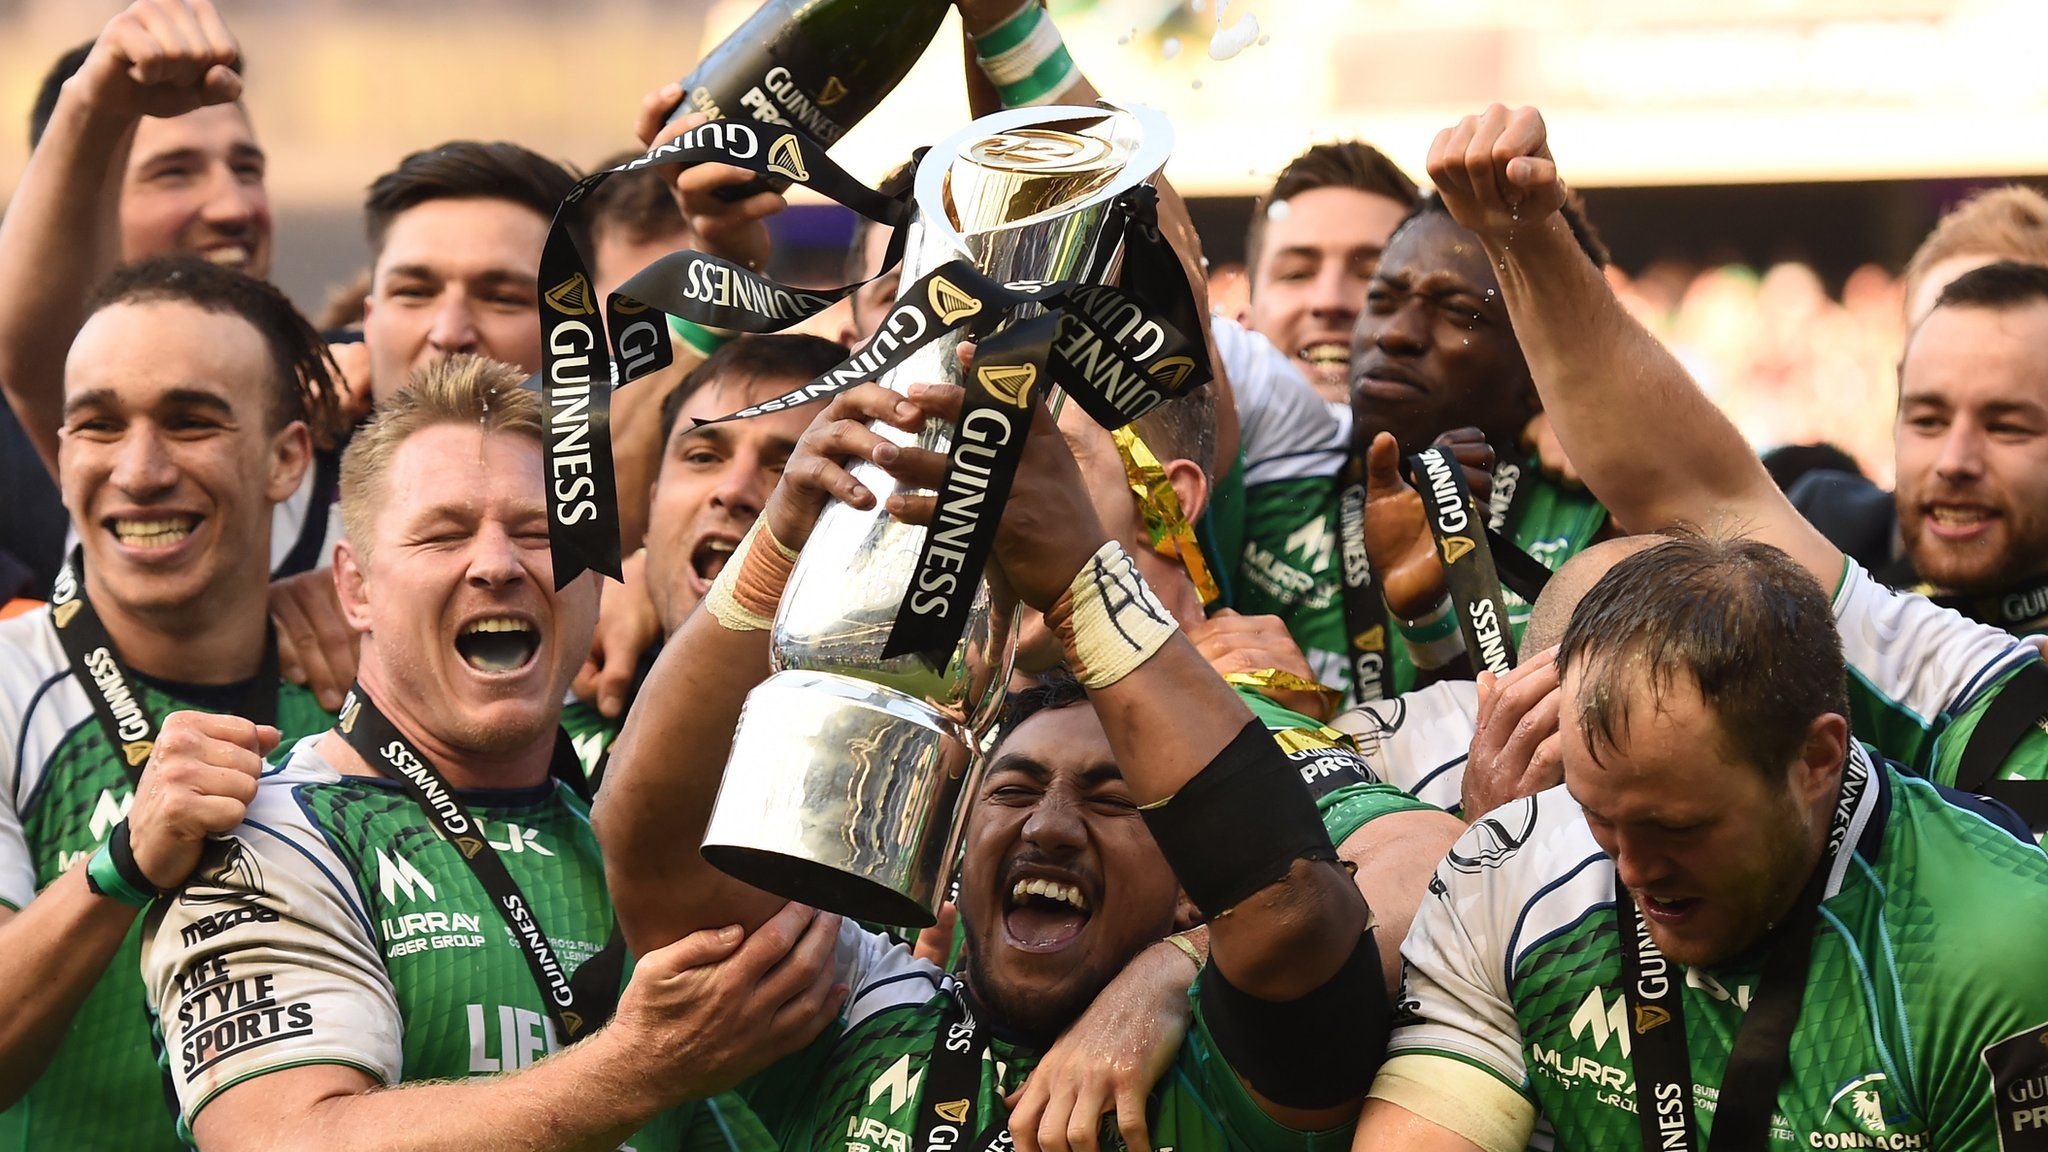 Connacht won the Pro12 for the first time in their history in 2015-16